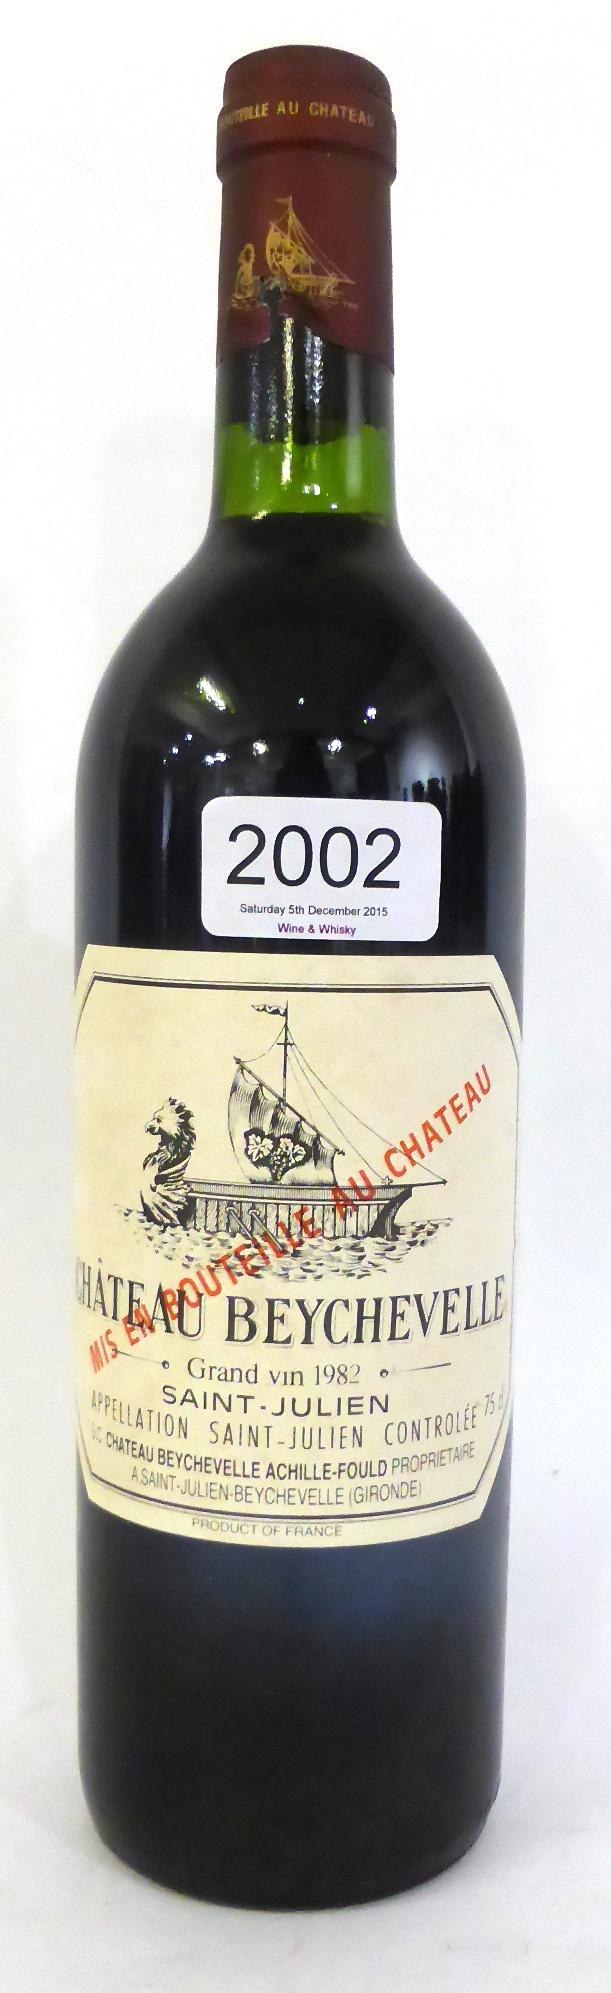 Chateau Beychevelle 1982, St Julien  U: very top shoulder, small nicks to capsule